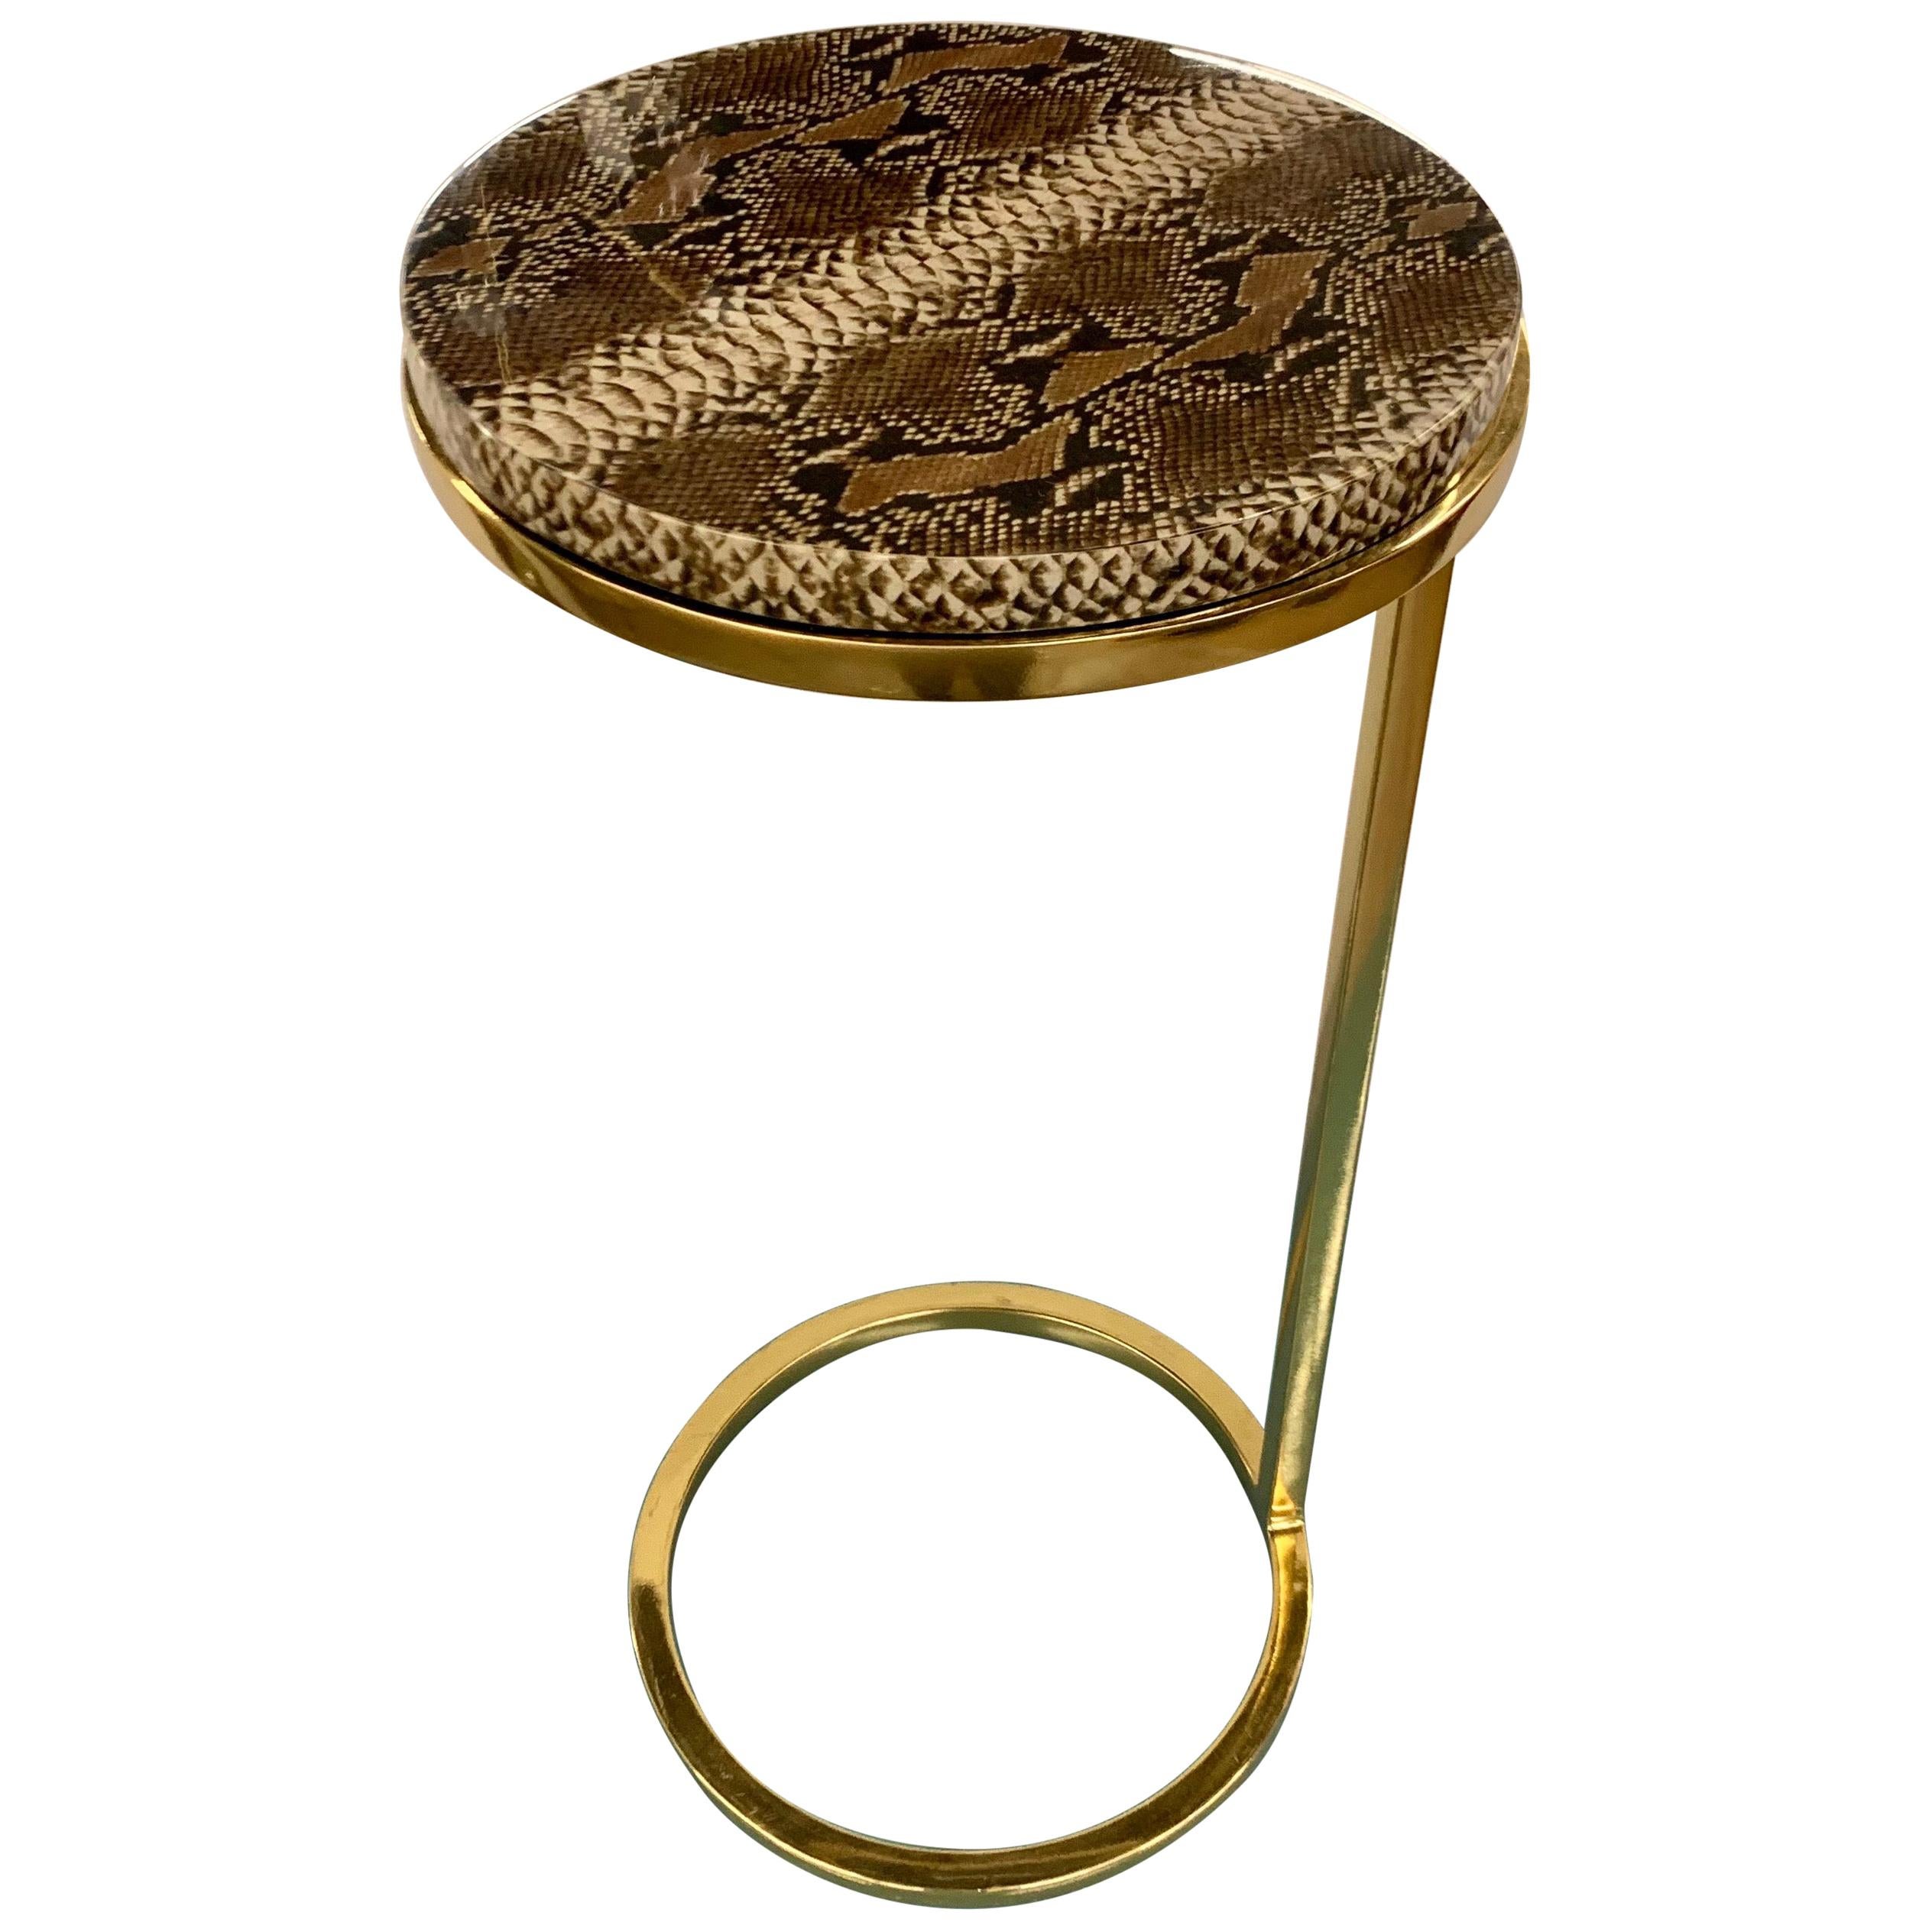 Iconic Brass and Snakeskin Style Cigarette Table